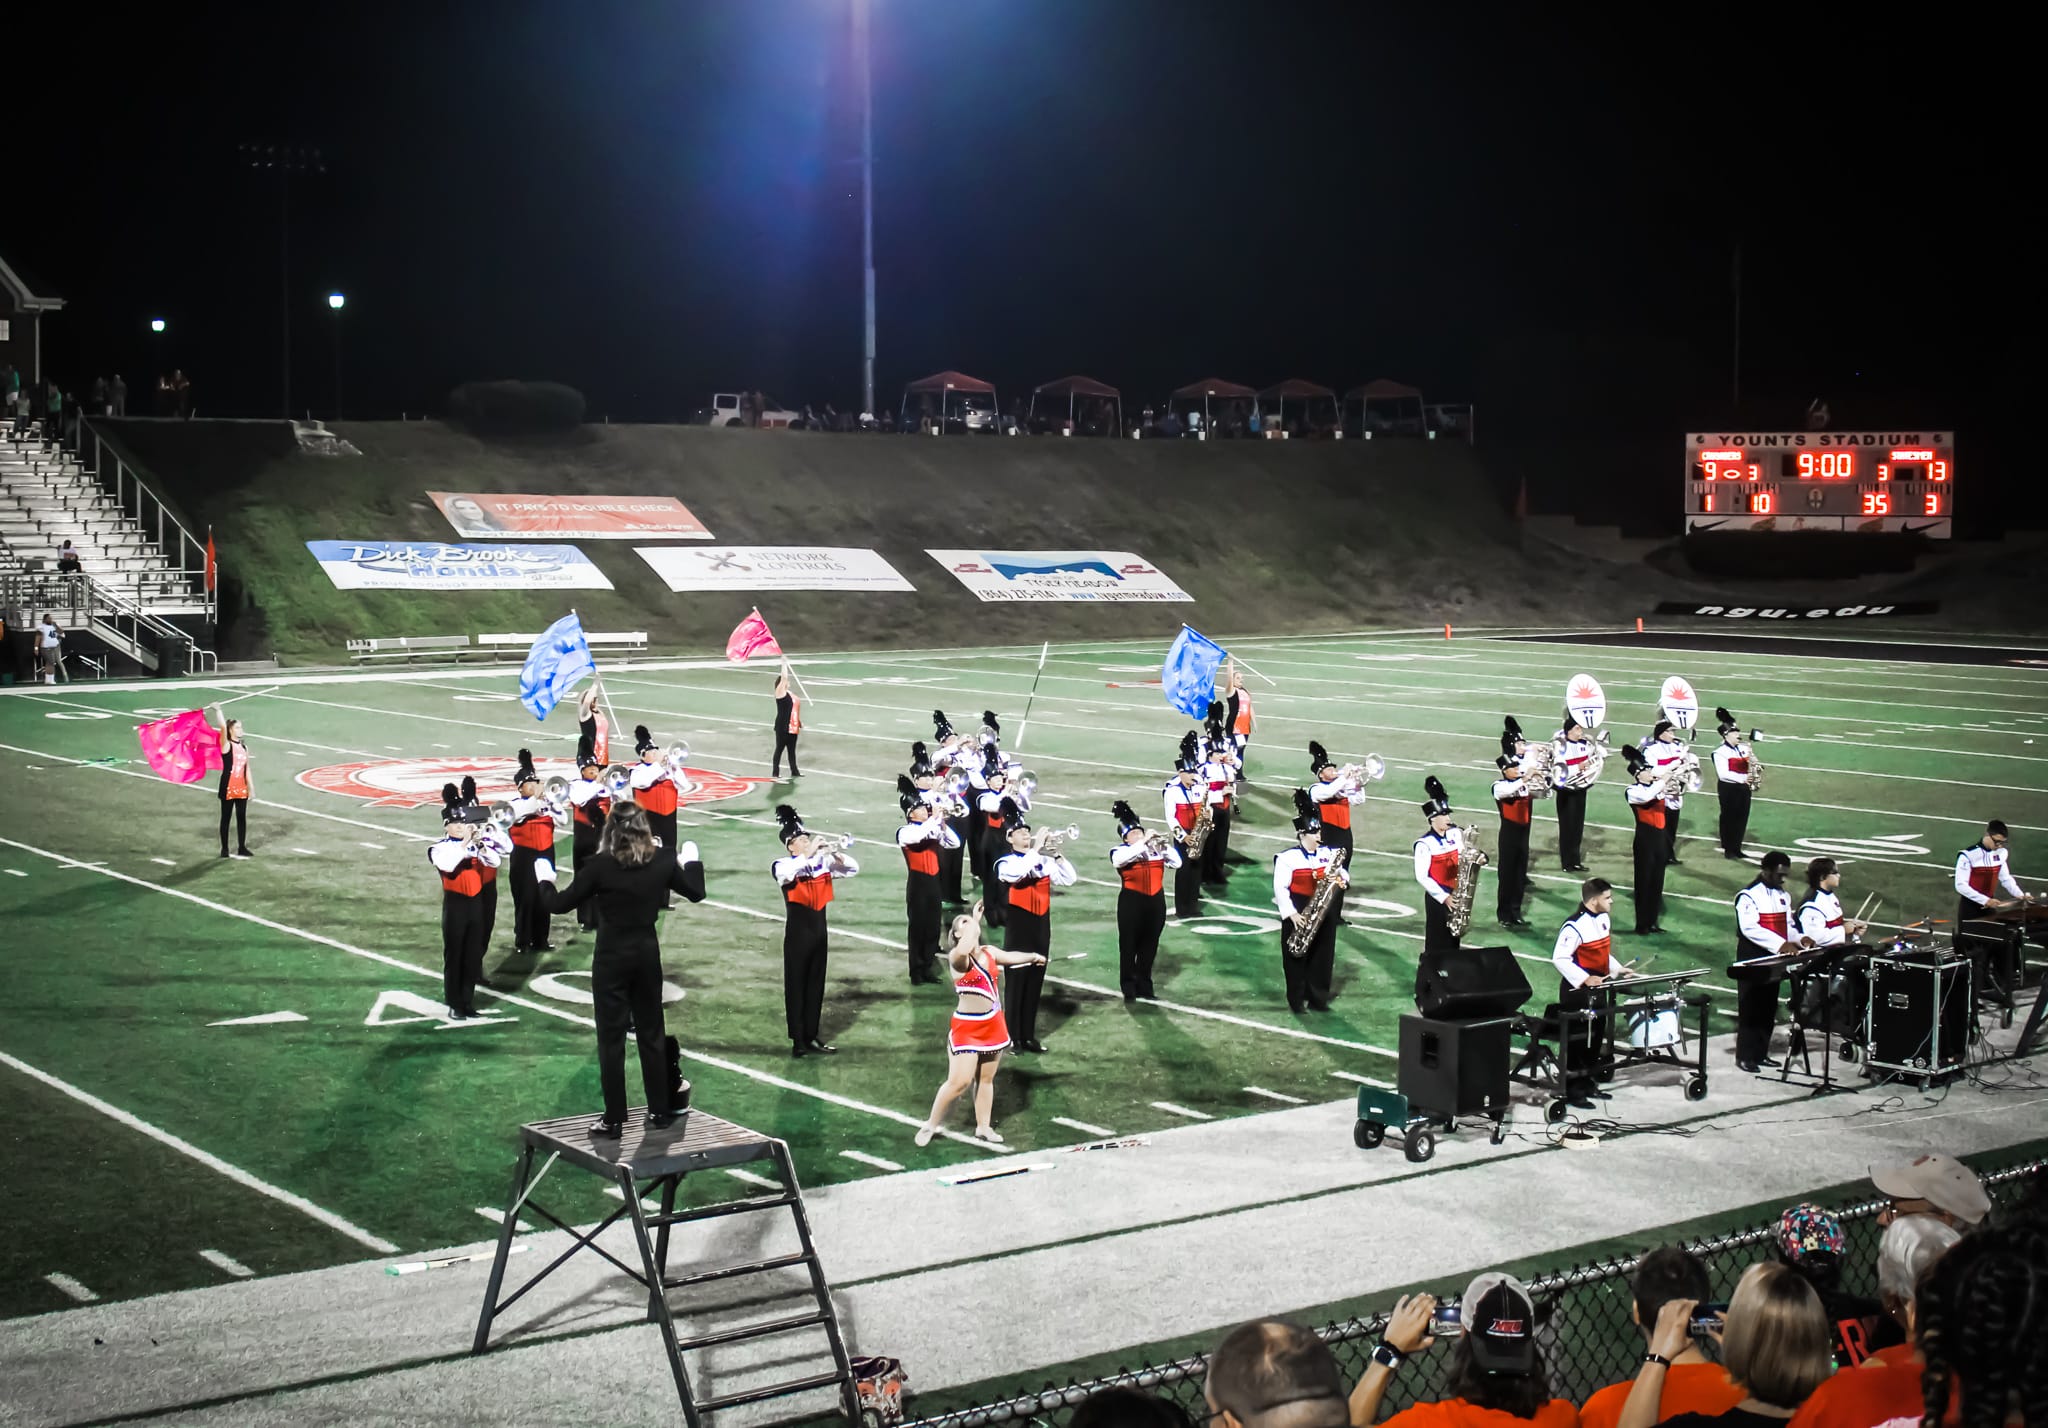 Band members perform their show at halftime.